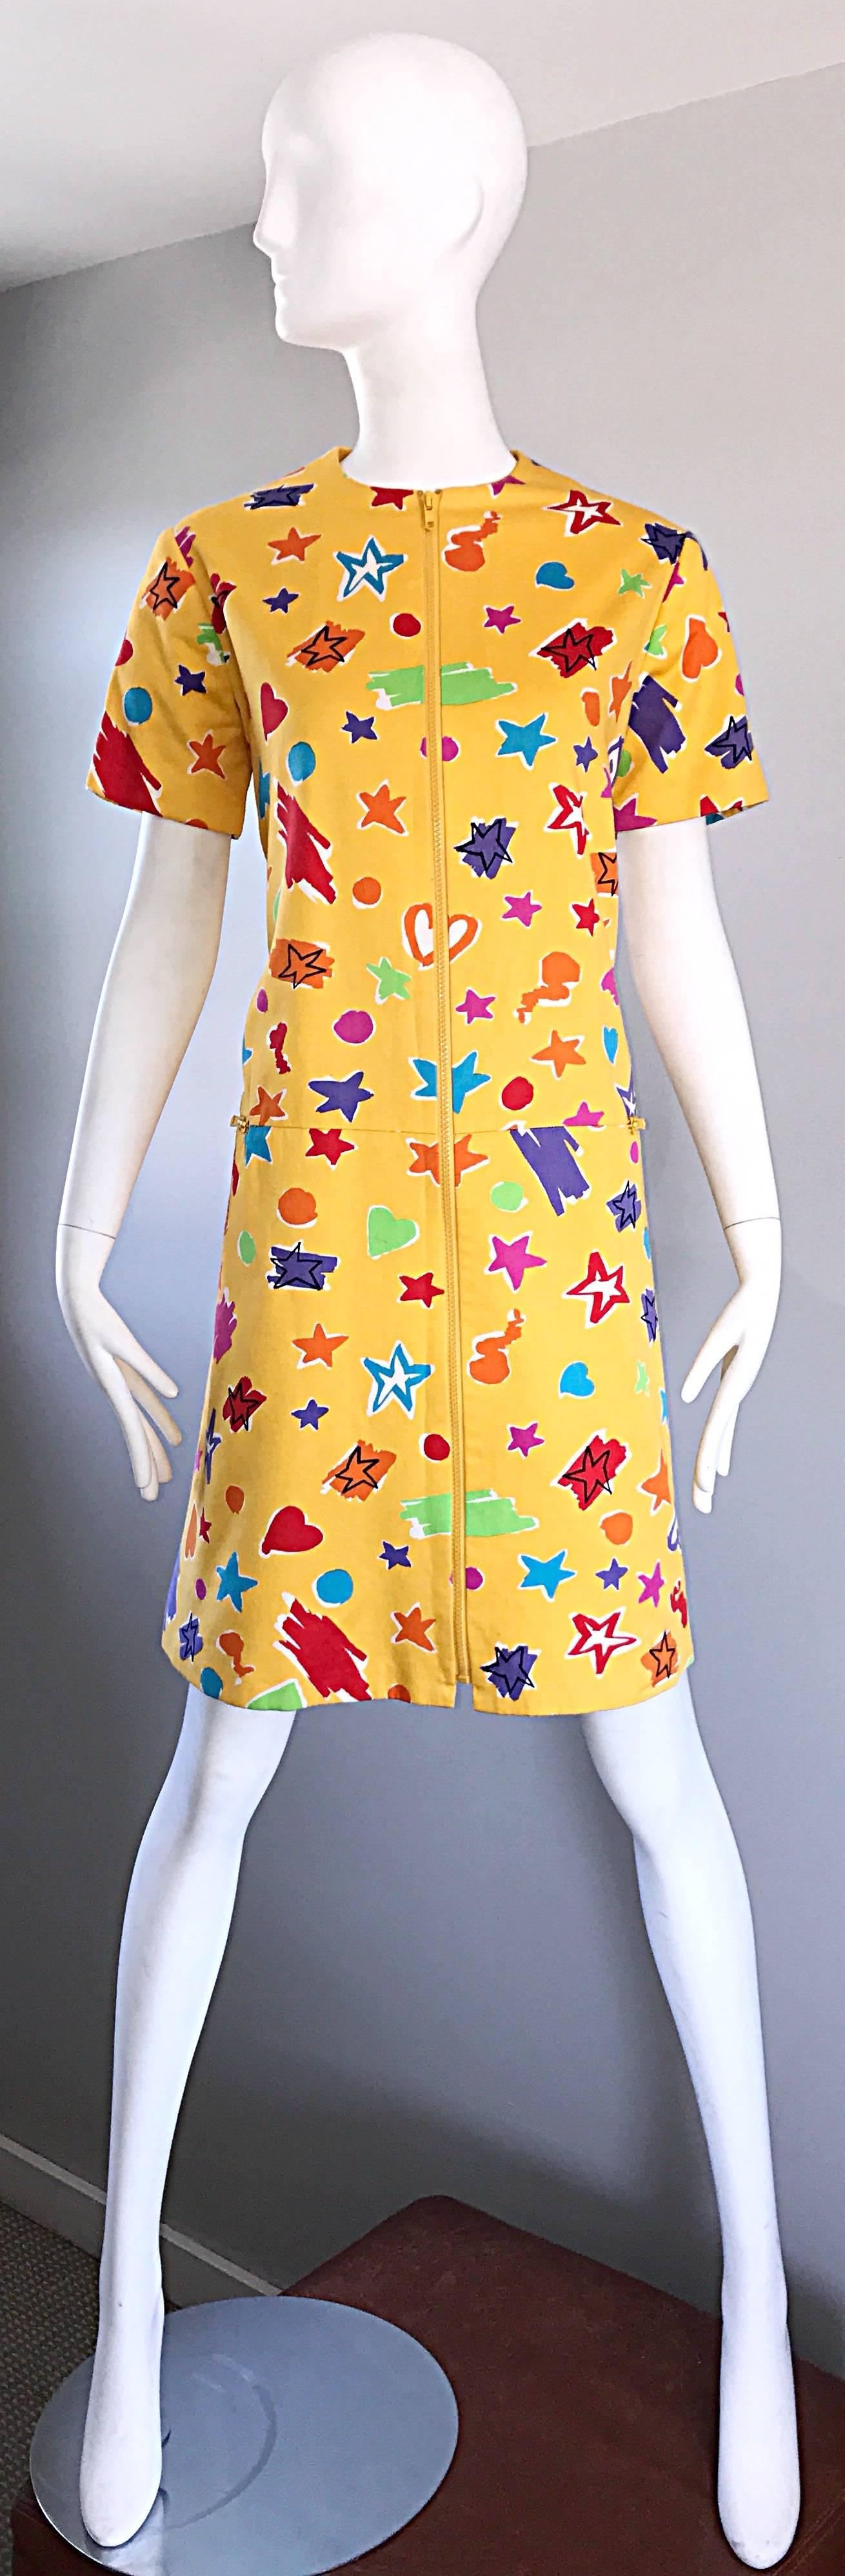 Rare and amazing vintage GEOFFREY BEENE early 90s  'hearts and stars' 1960s 60s style yellow cotton short sleeve shift / A - Line dress! Features colorful hearts and stars throughout. Vibrant yellow background, with blue, green, pink, red, white,